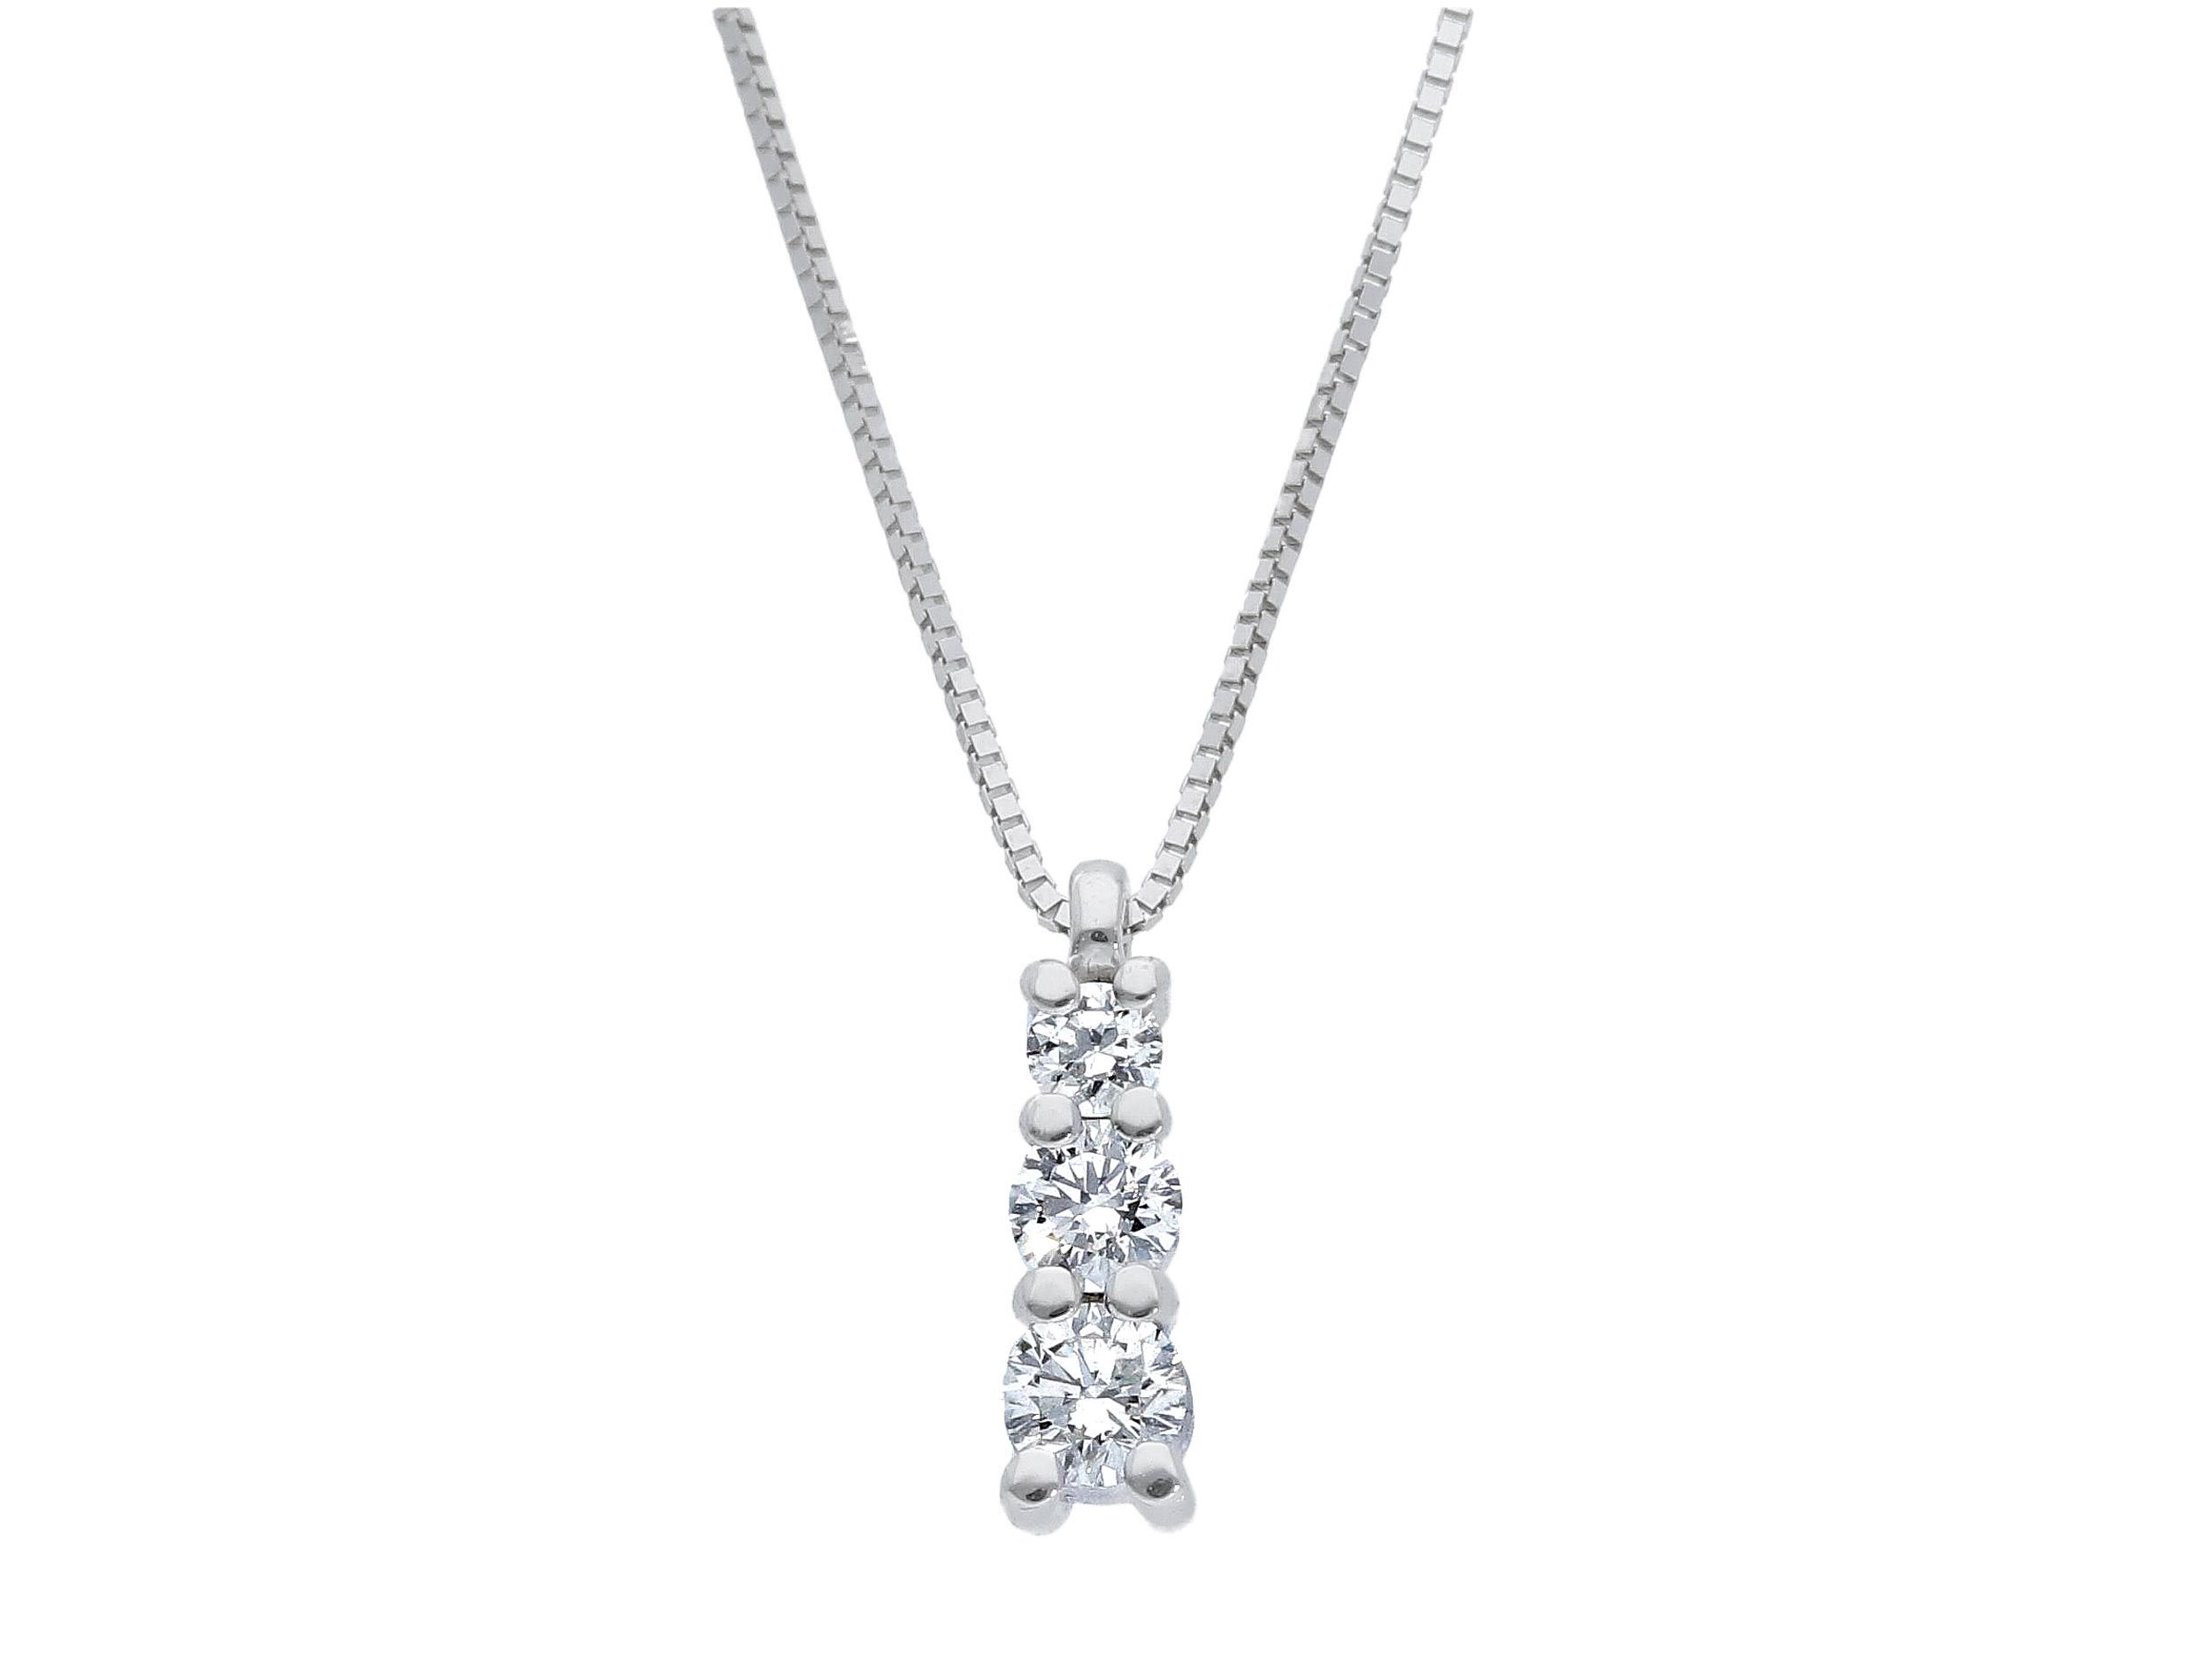  White gold necklace k18 with diamonds (code S225764)